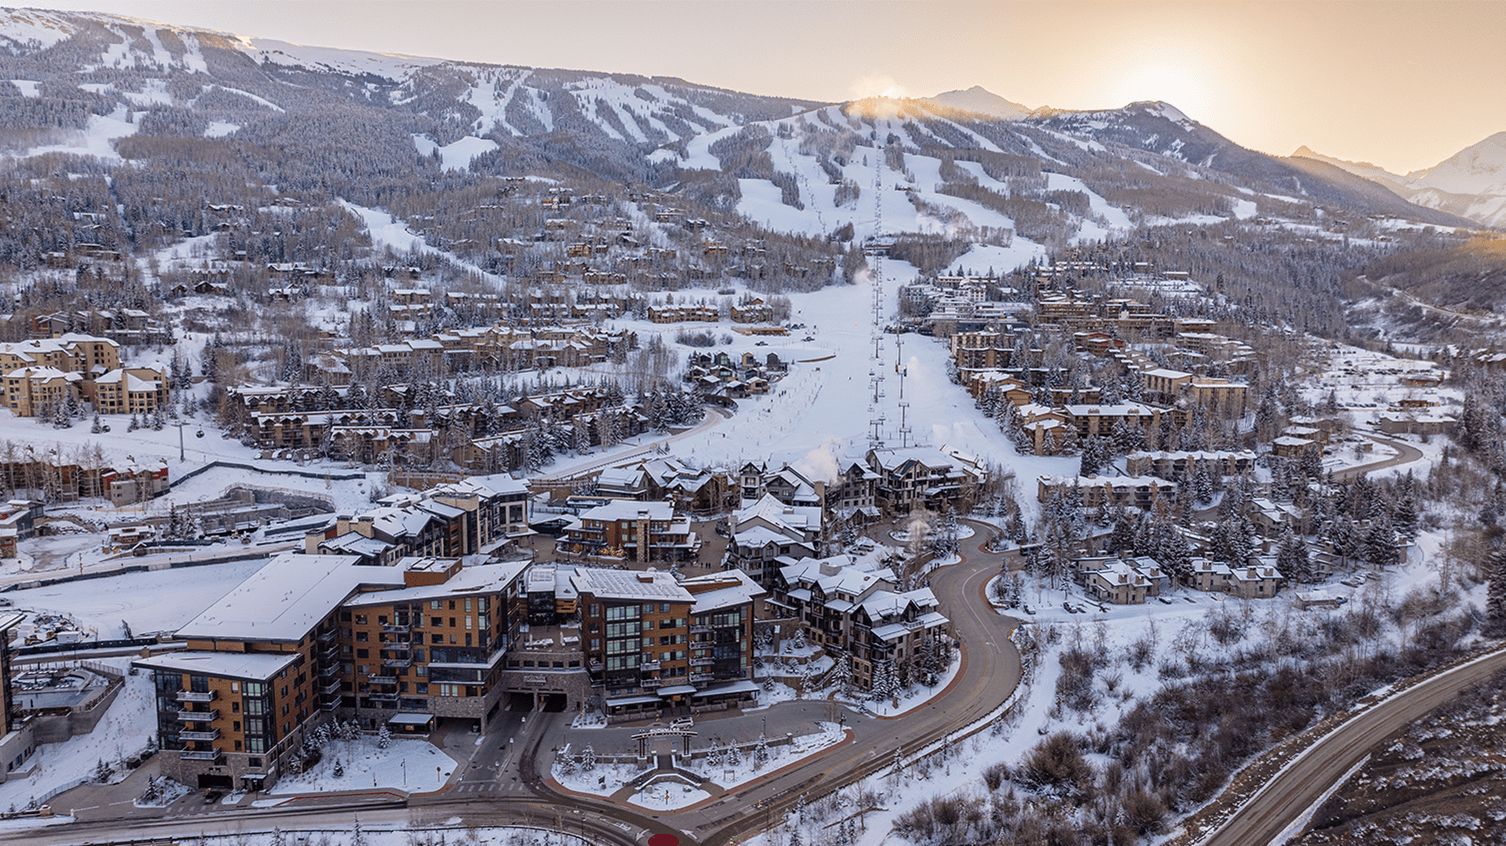 long view of Snowmass, Limelight hotel at base and expansive resort in background, at sunrise